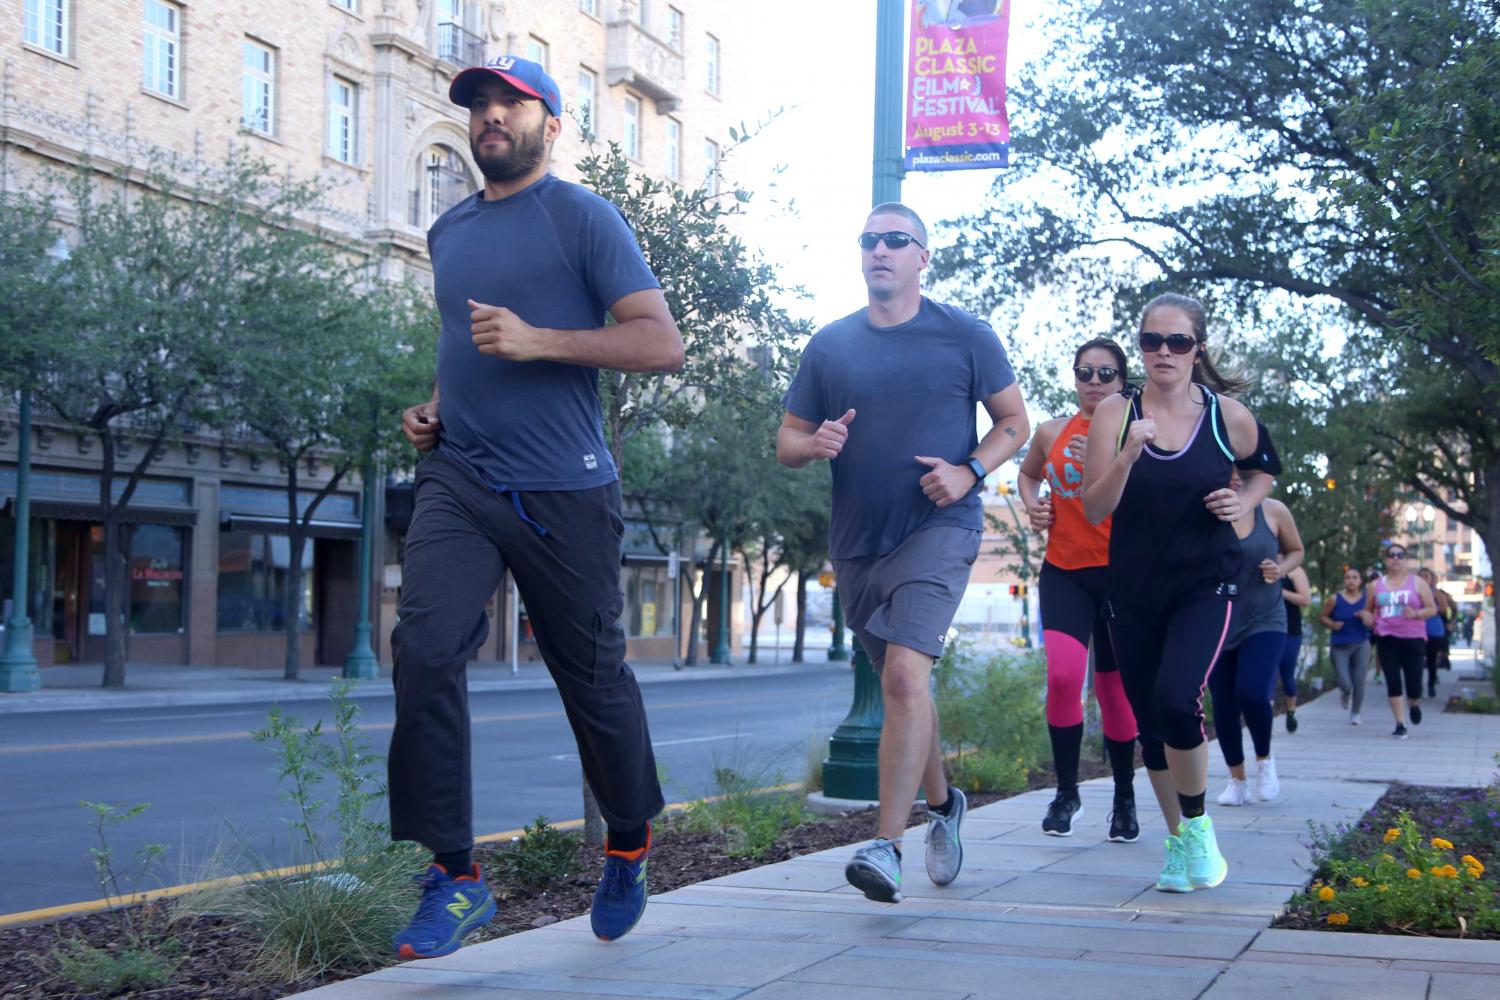 Downtown Fitness Saturdays promote health